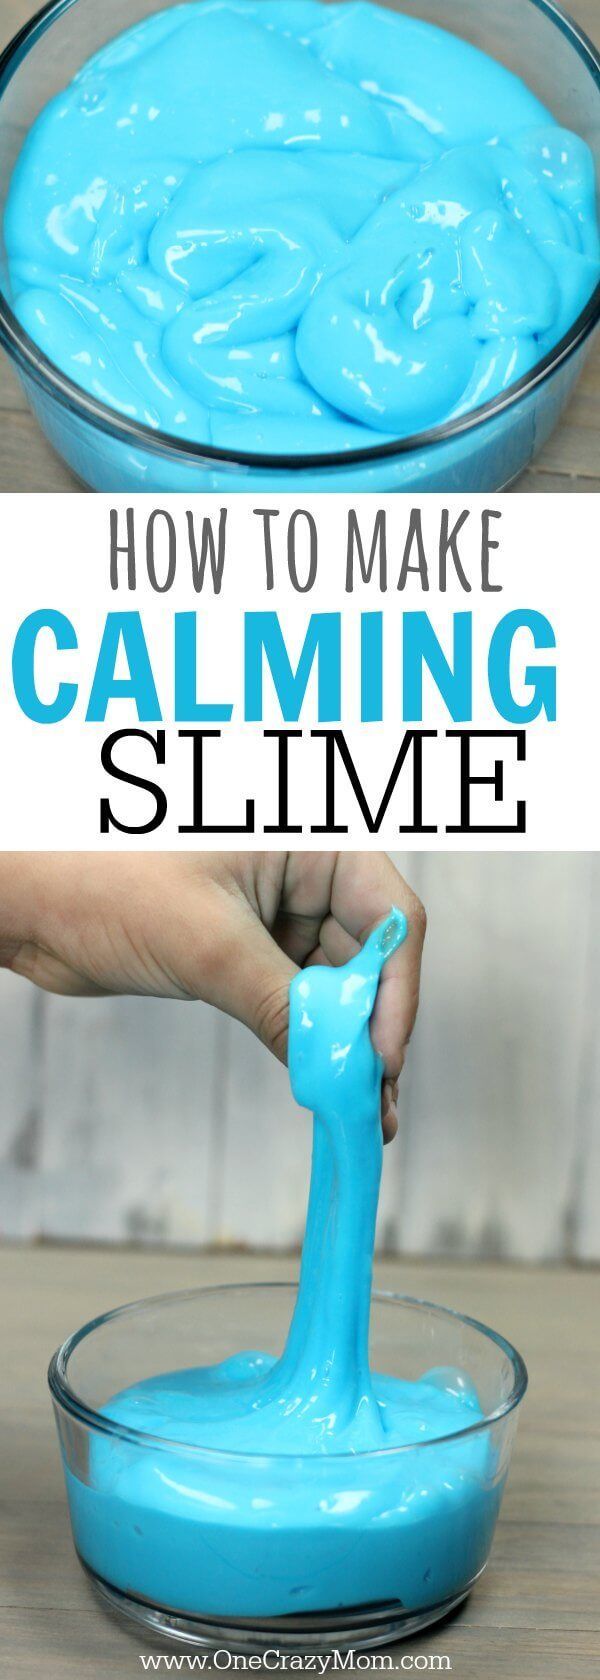 How to make Slime for Kids - DIY Calming Slime that is easy to make! -   17 diy slime silly putty
 ideas